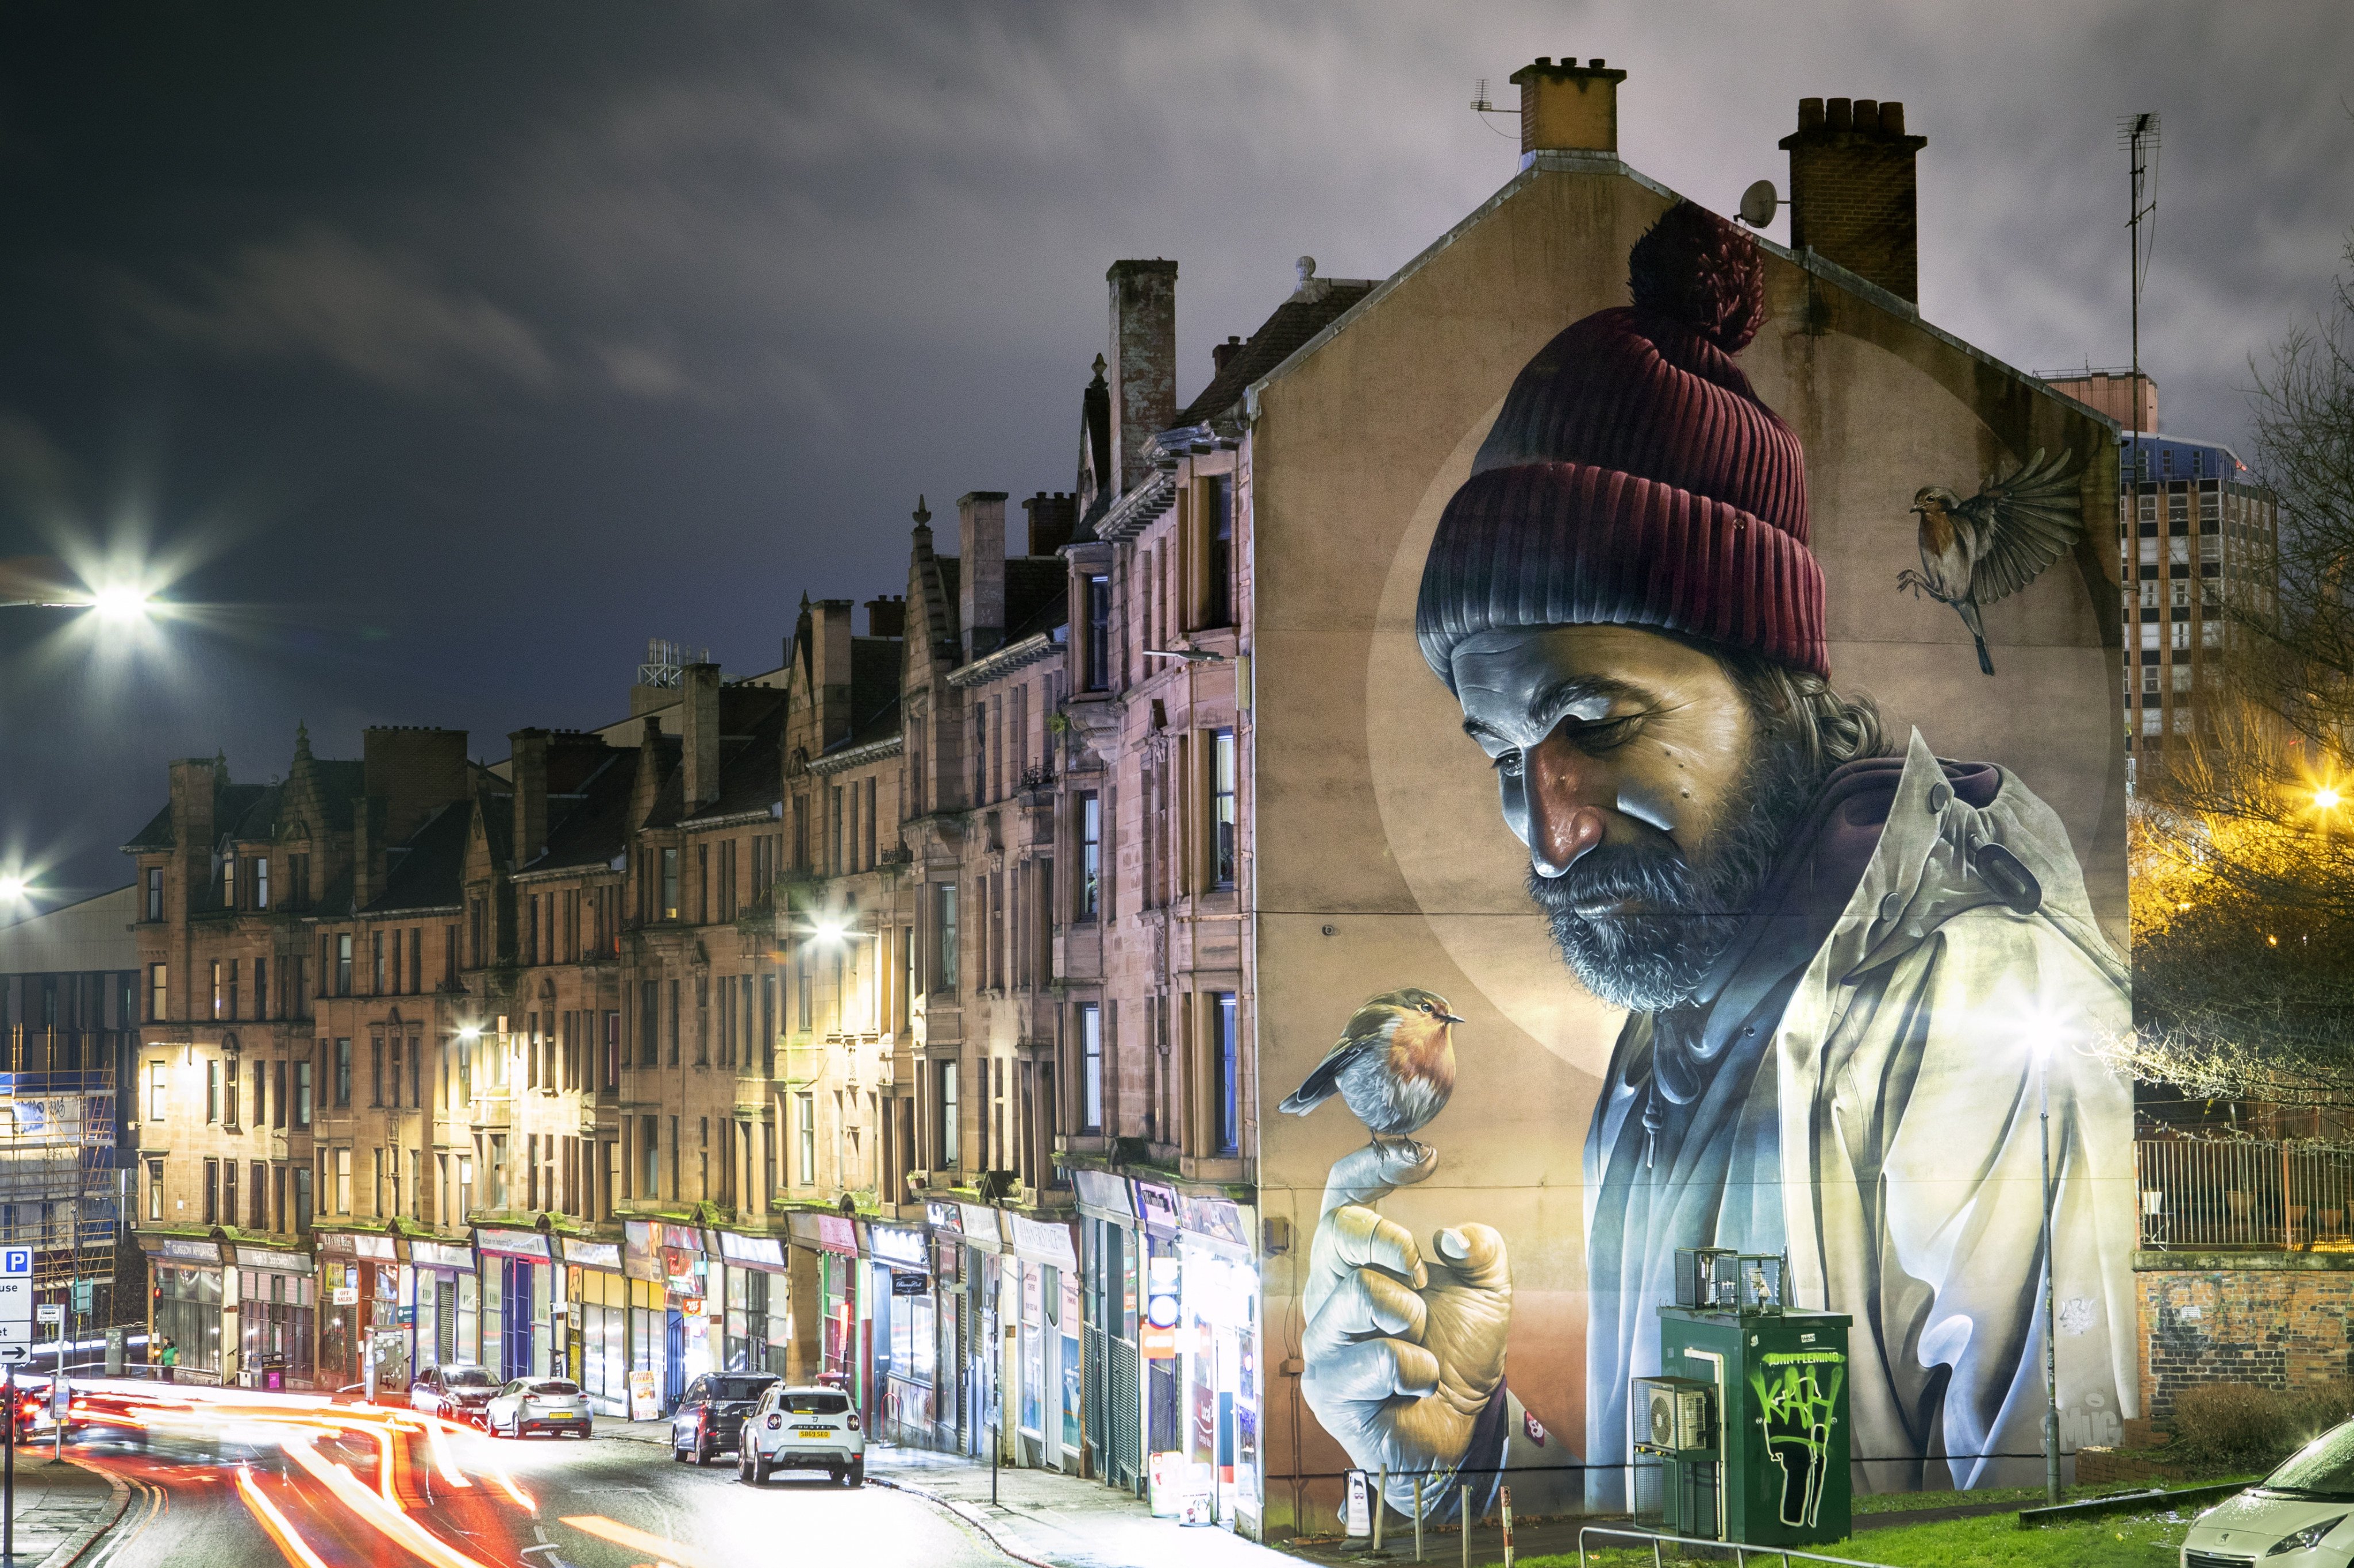 One of Glasgow’s best-know murals, by street artist Smug, depicts a modern-day St Mungo, its patron saint and founder. Street art has proliferated in the Scottish city. Photo: Getty Images